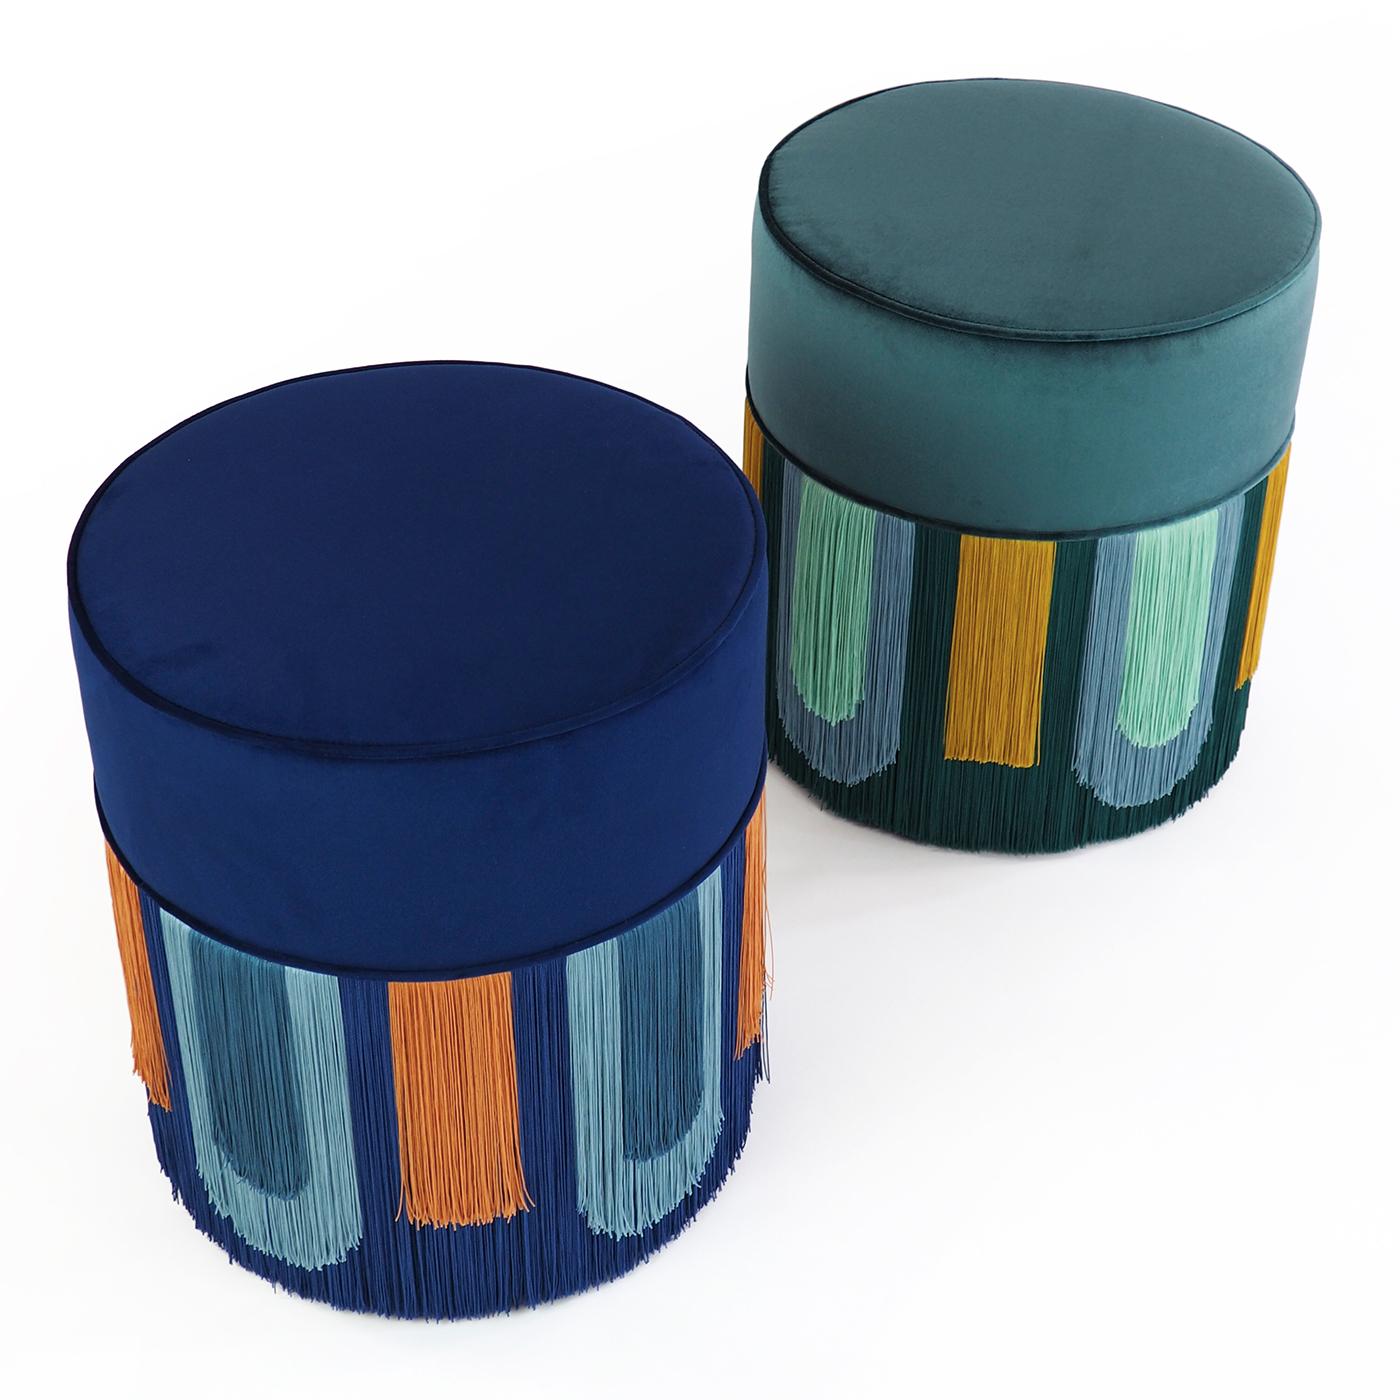 Borrowing from the stylish elegance of Art Deco style, this exquisite ottoman is the epitome of retro-chic. The cylindrical silhouette is enlivened by dynamic velvet upholstery in deep peacock green, accented by a cascade of long, multi-colored